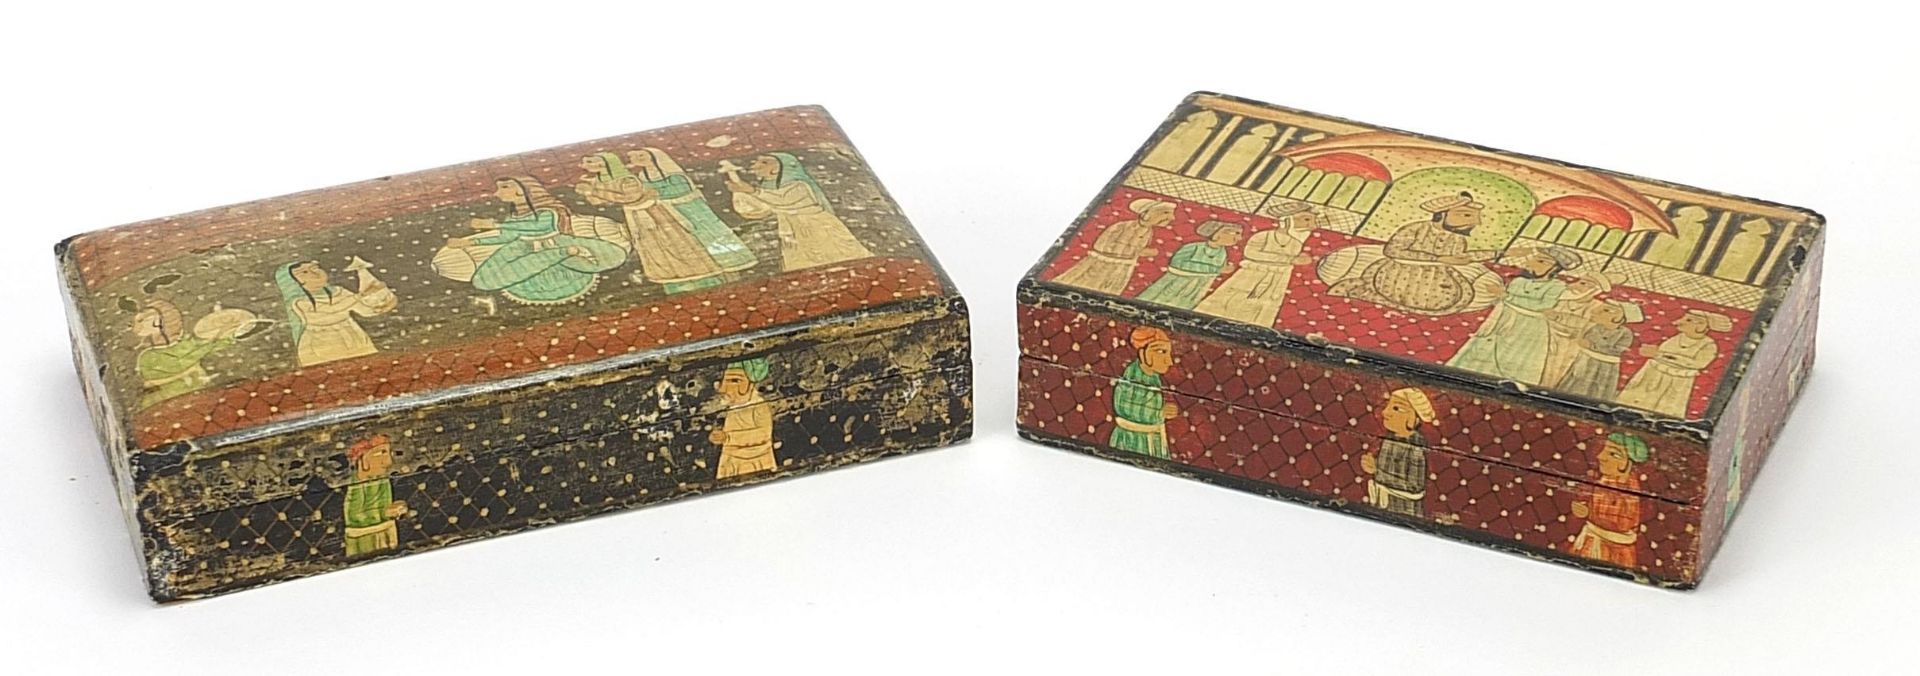 Two Indian Kashmir lacquered boxes and covers hand painted with figures praying, one with paper